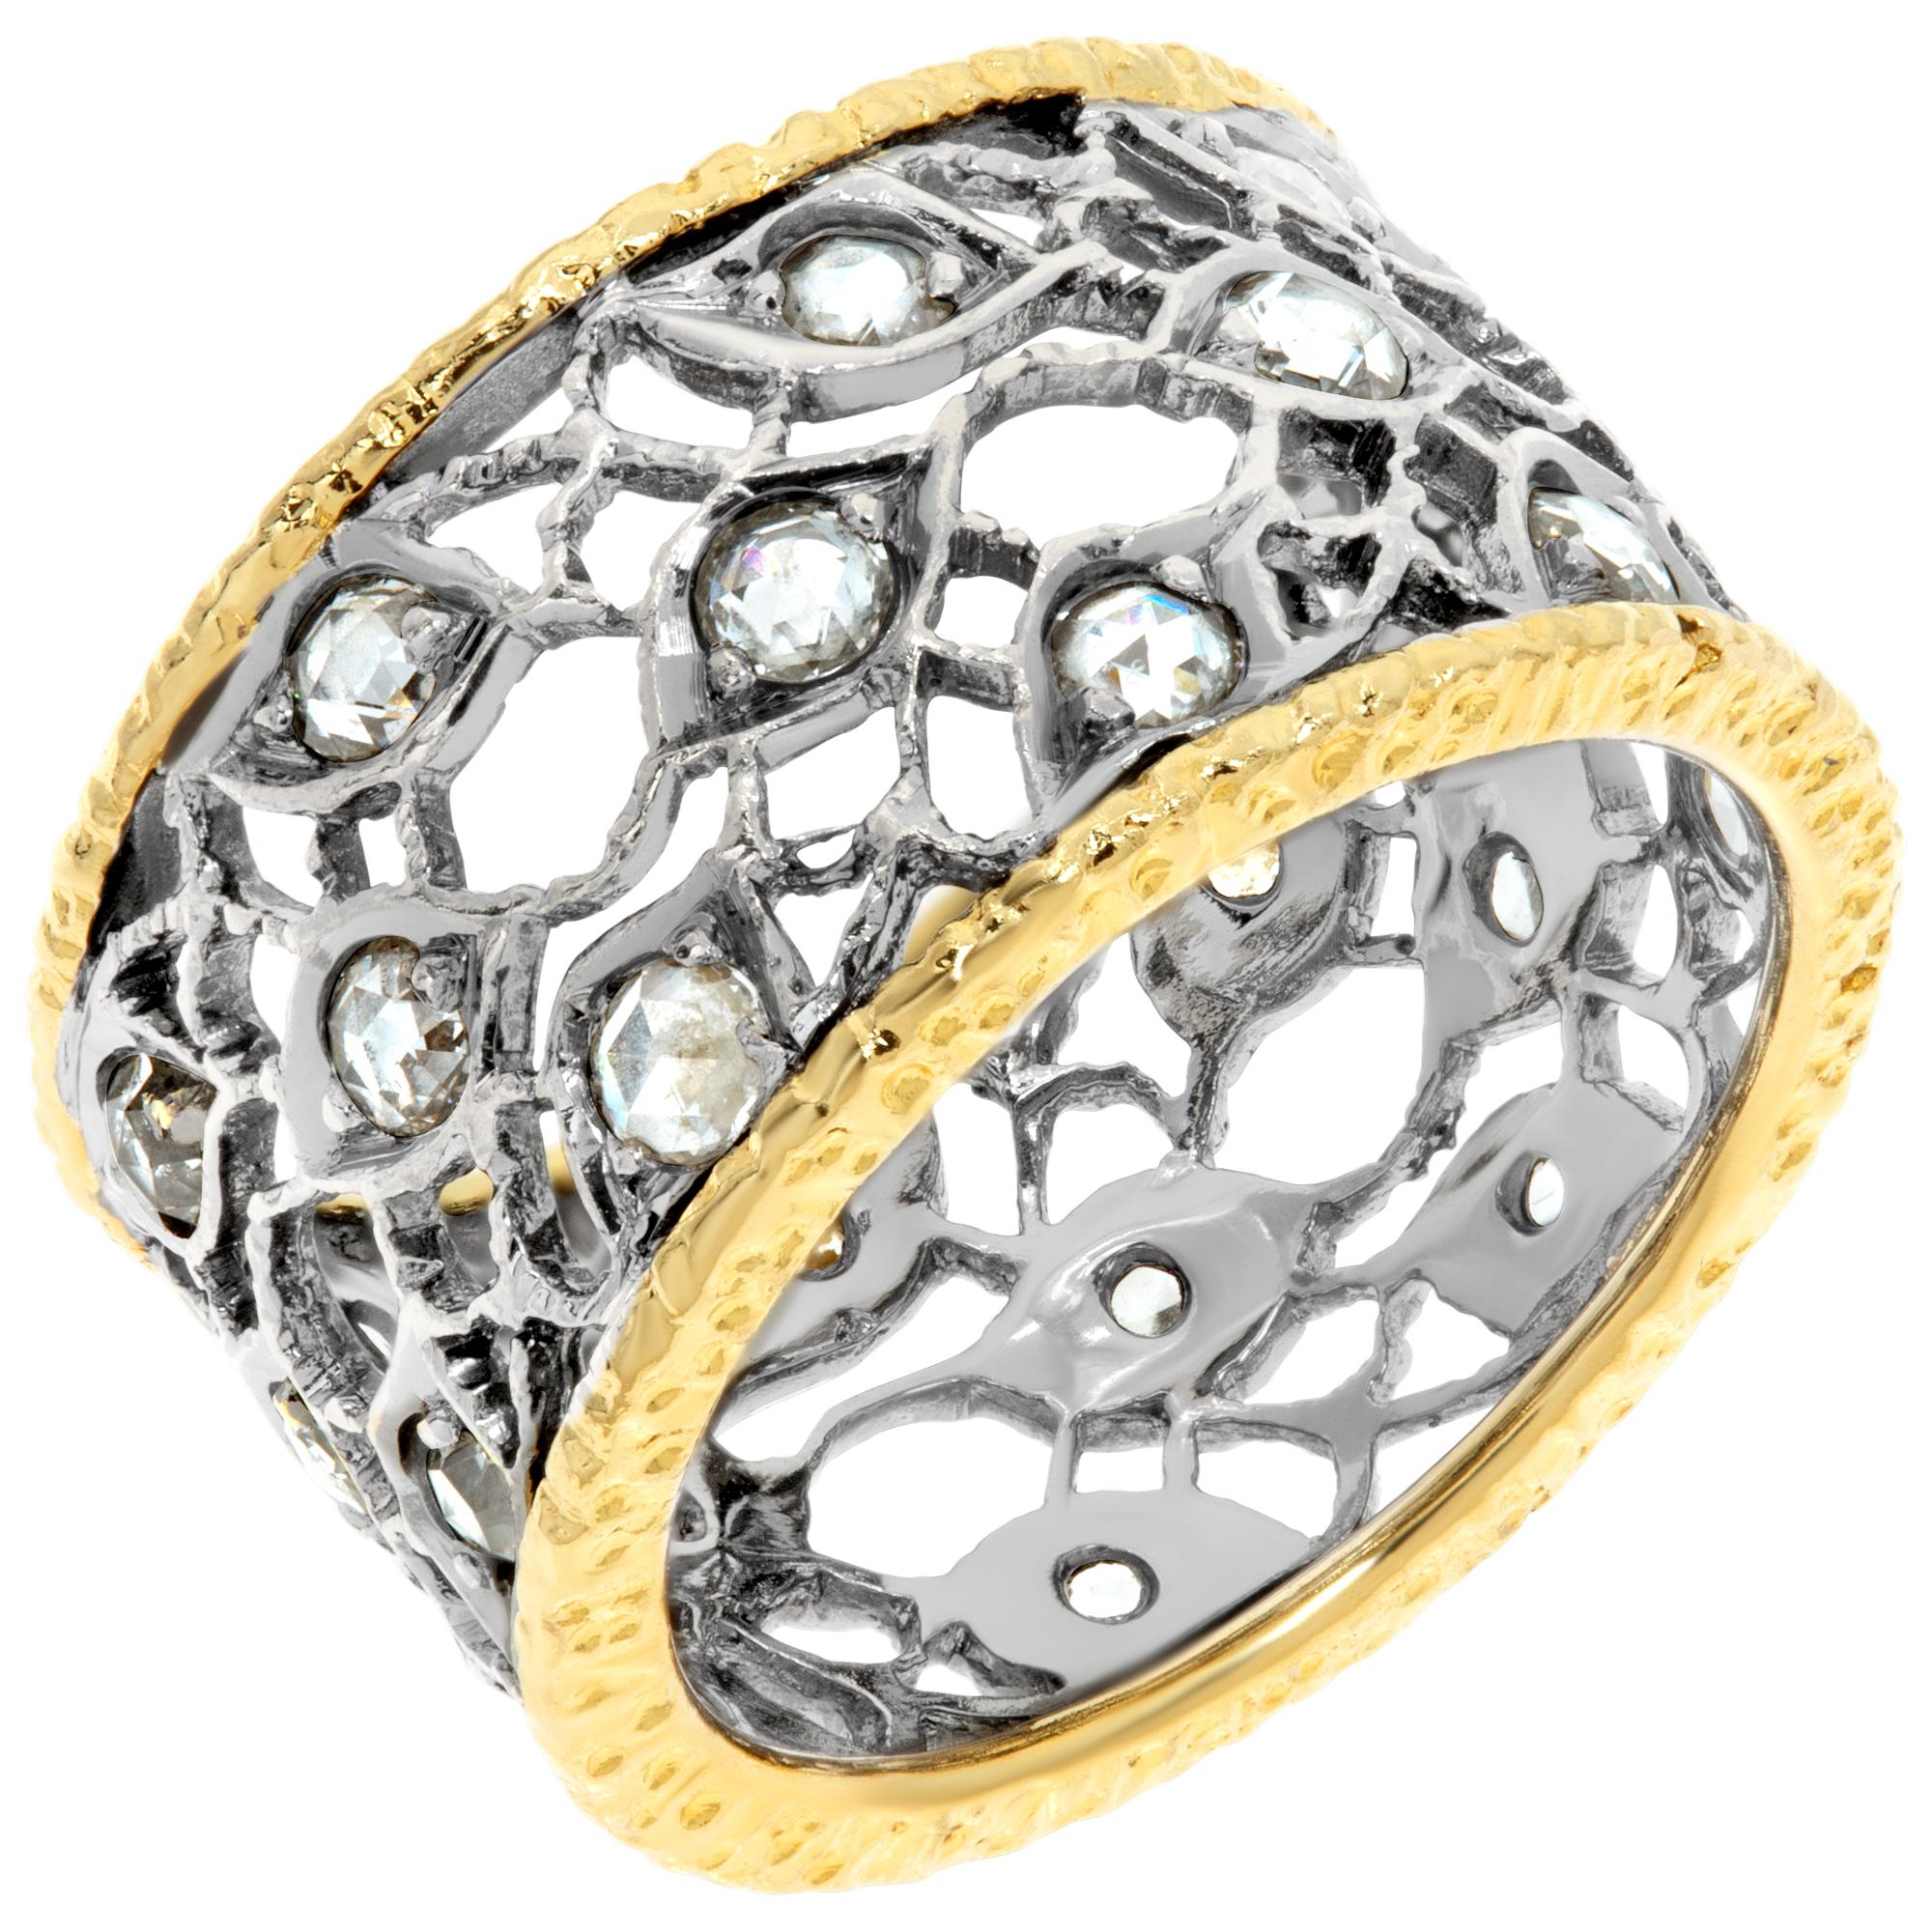 Diamond 18k white & yellow gold eternity band In Excellent Condition For Sale In Surfside, FL